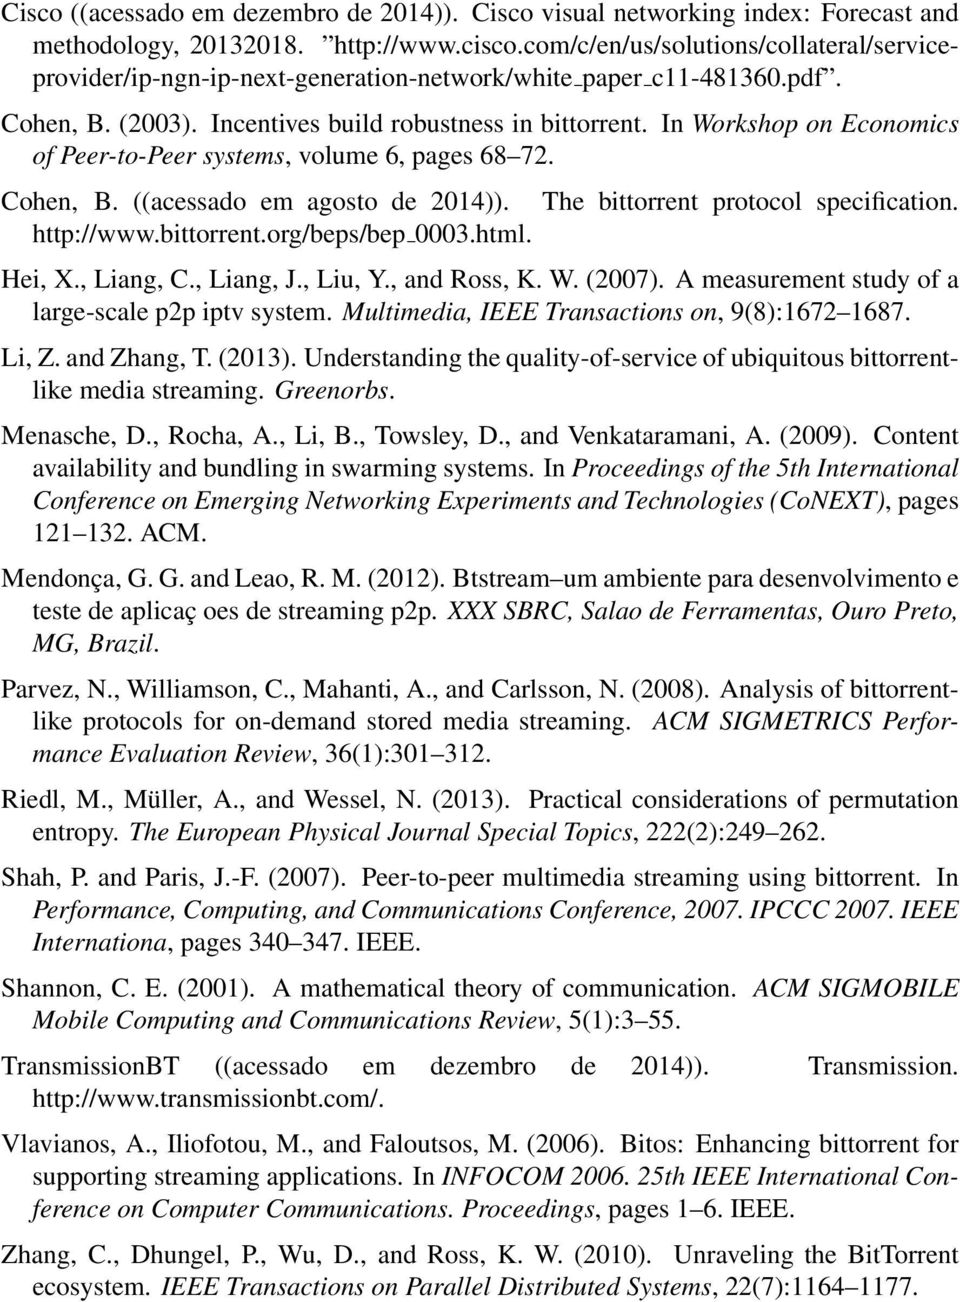 In Workshop on Economics of Peer-to-Peer systems, volume 6, pages 68 72. Cohen, B. ((acessado em agosto de 2014)). The bittorrent protocol specification. http://www.bittorrent.org/beps/bep 0003.html.